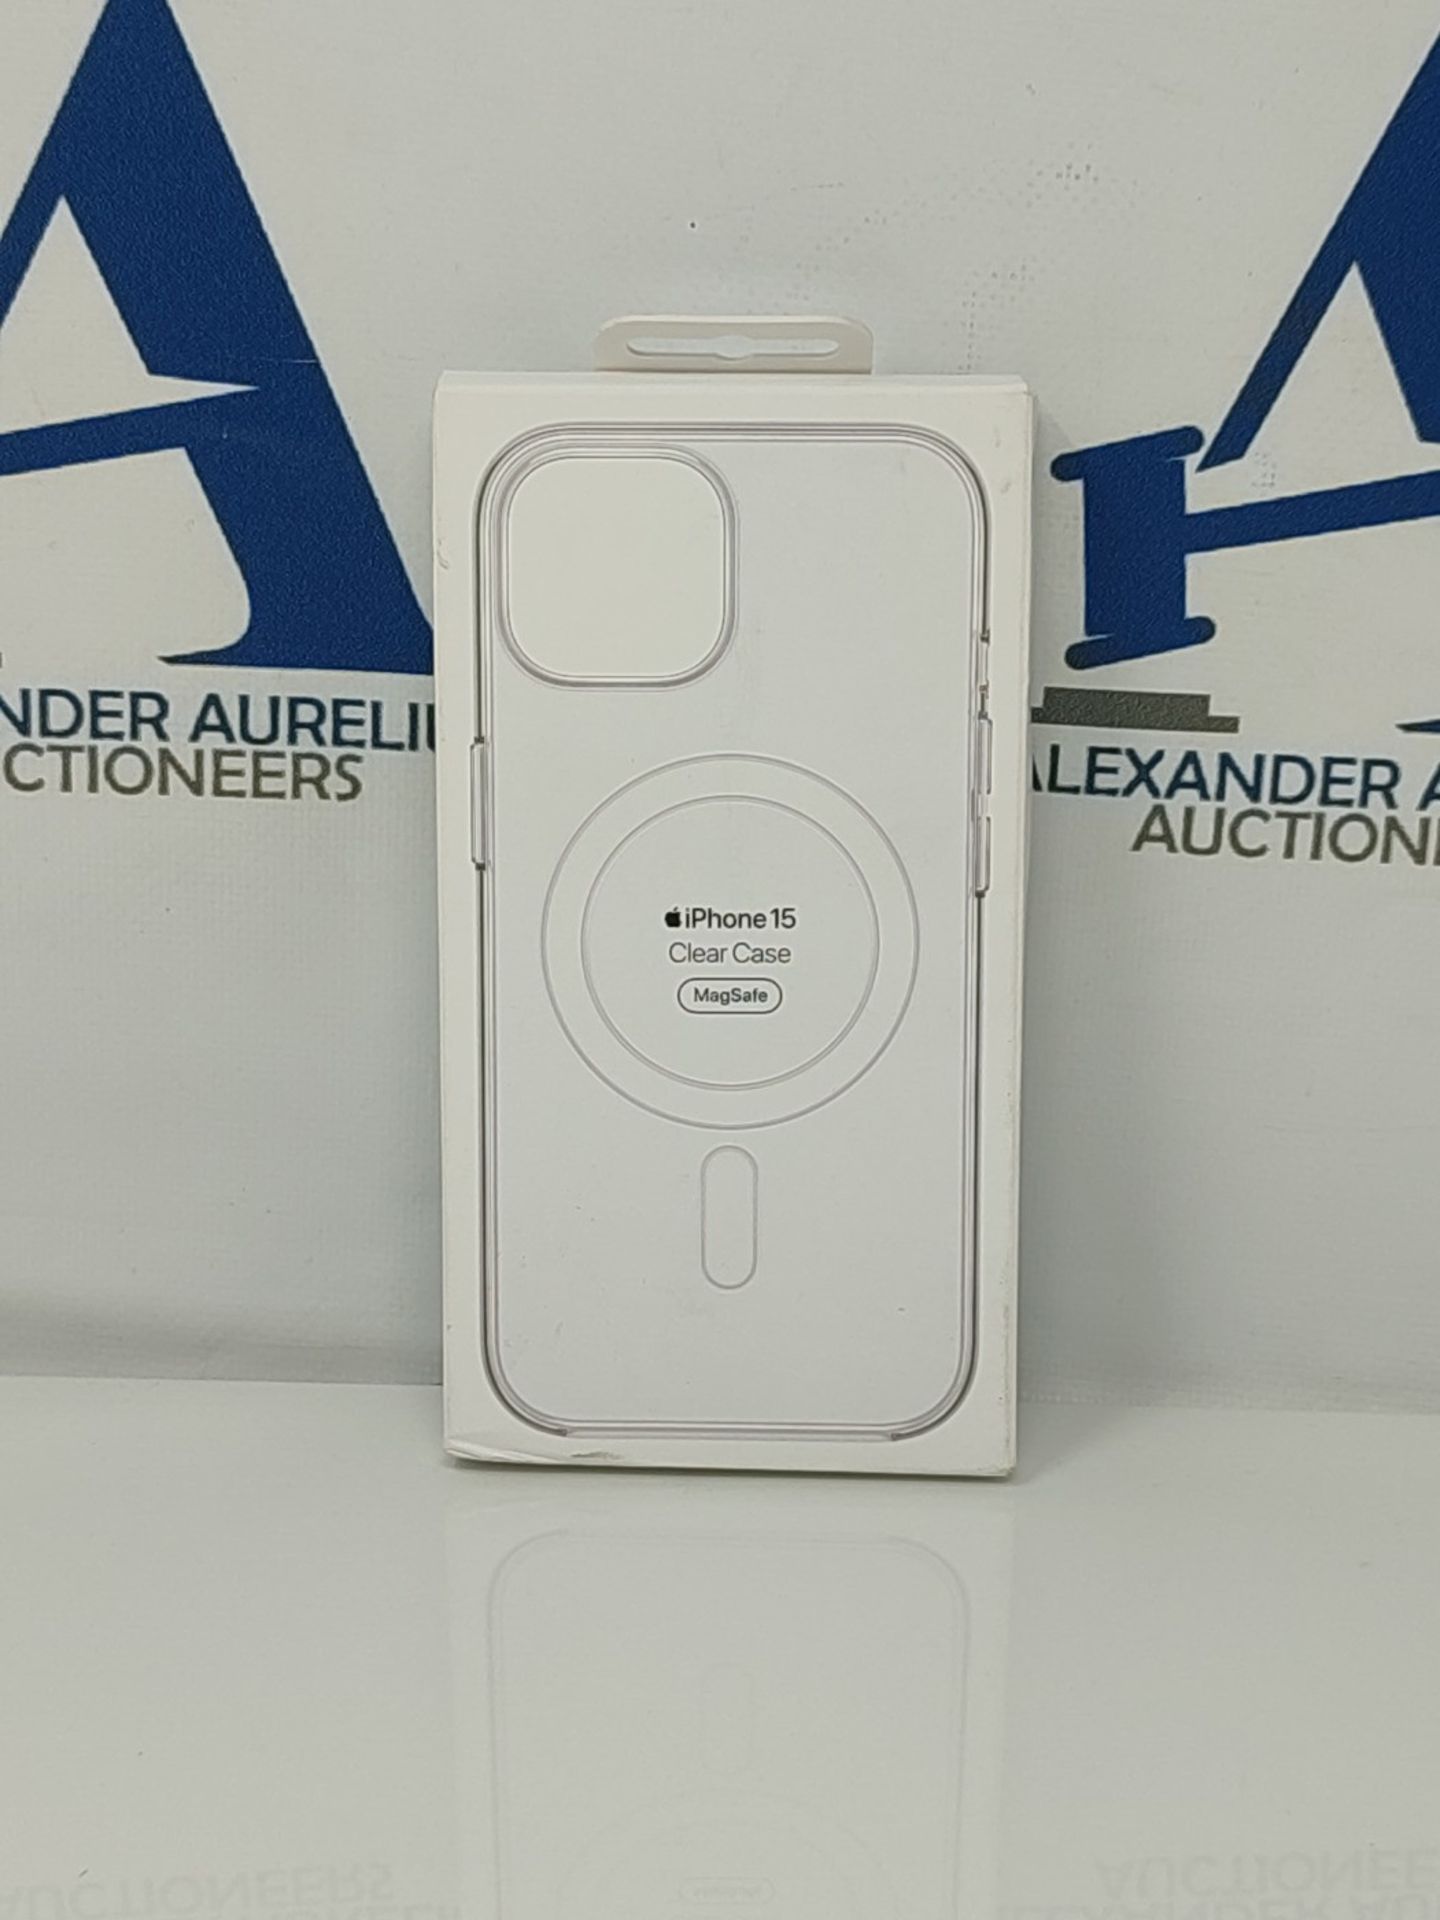 Apple iPhone 15 Clear Case with MagSafe - Image 2 of 3